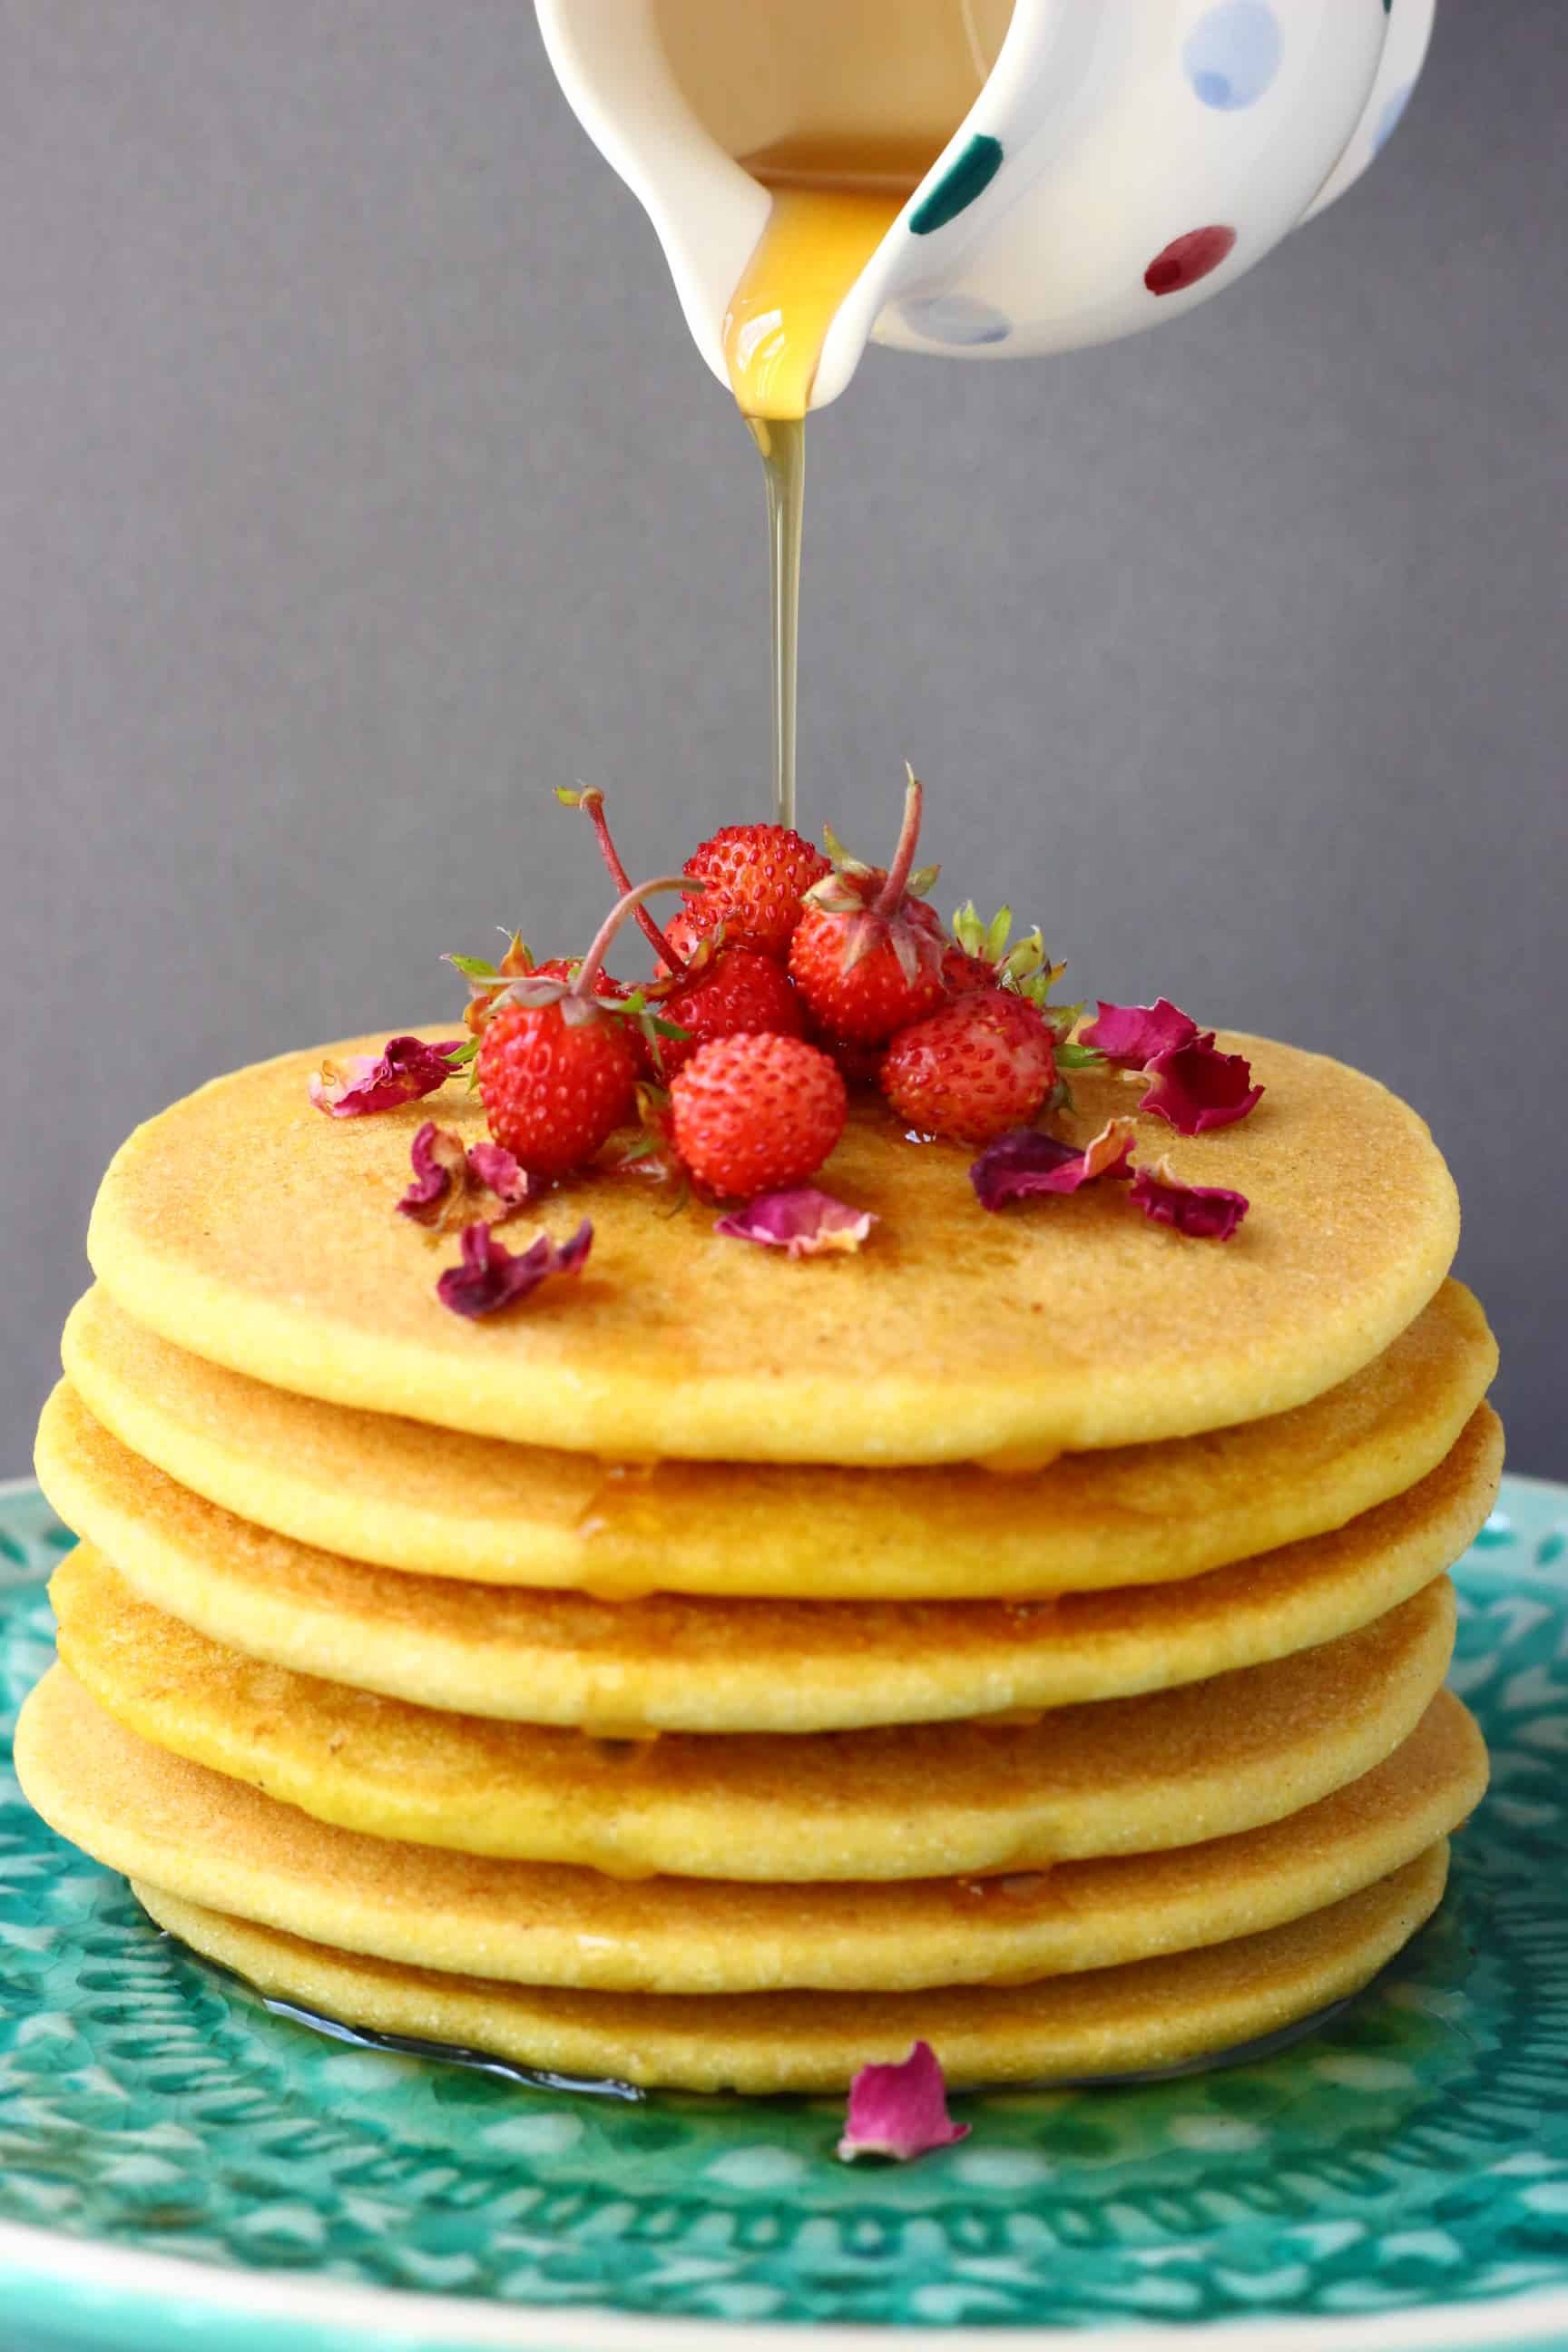 A stack of six gluten-free vegan cornmeal pancakes on a plate topped with mini strawberries and rose petals with a jug pouring maple syrup over them